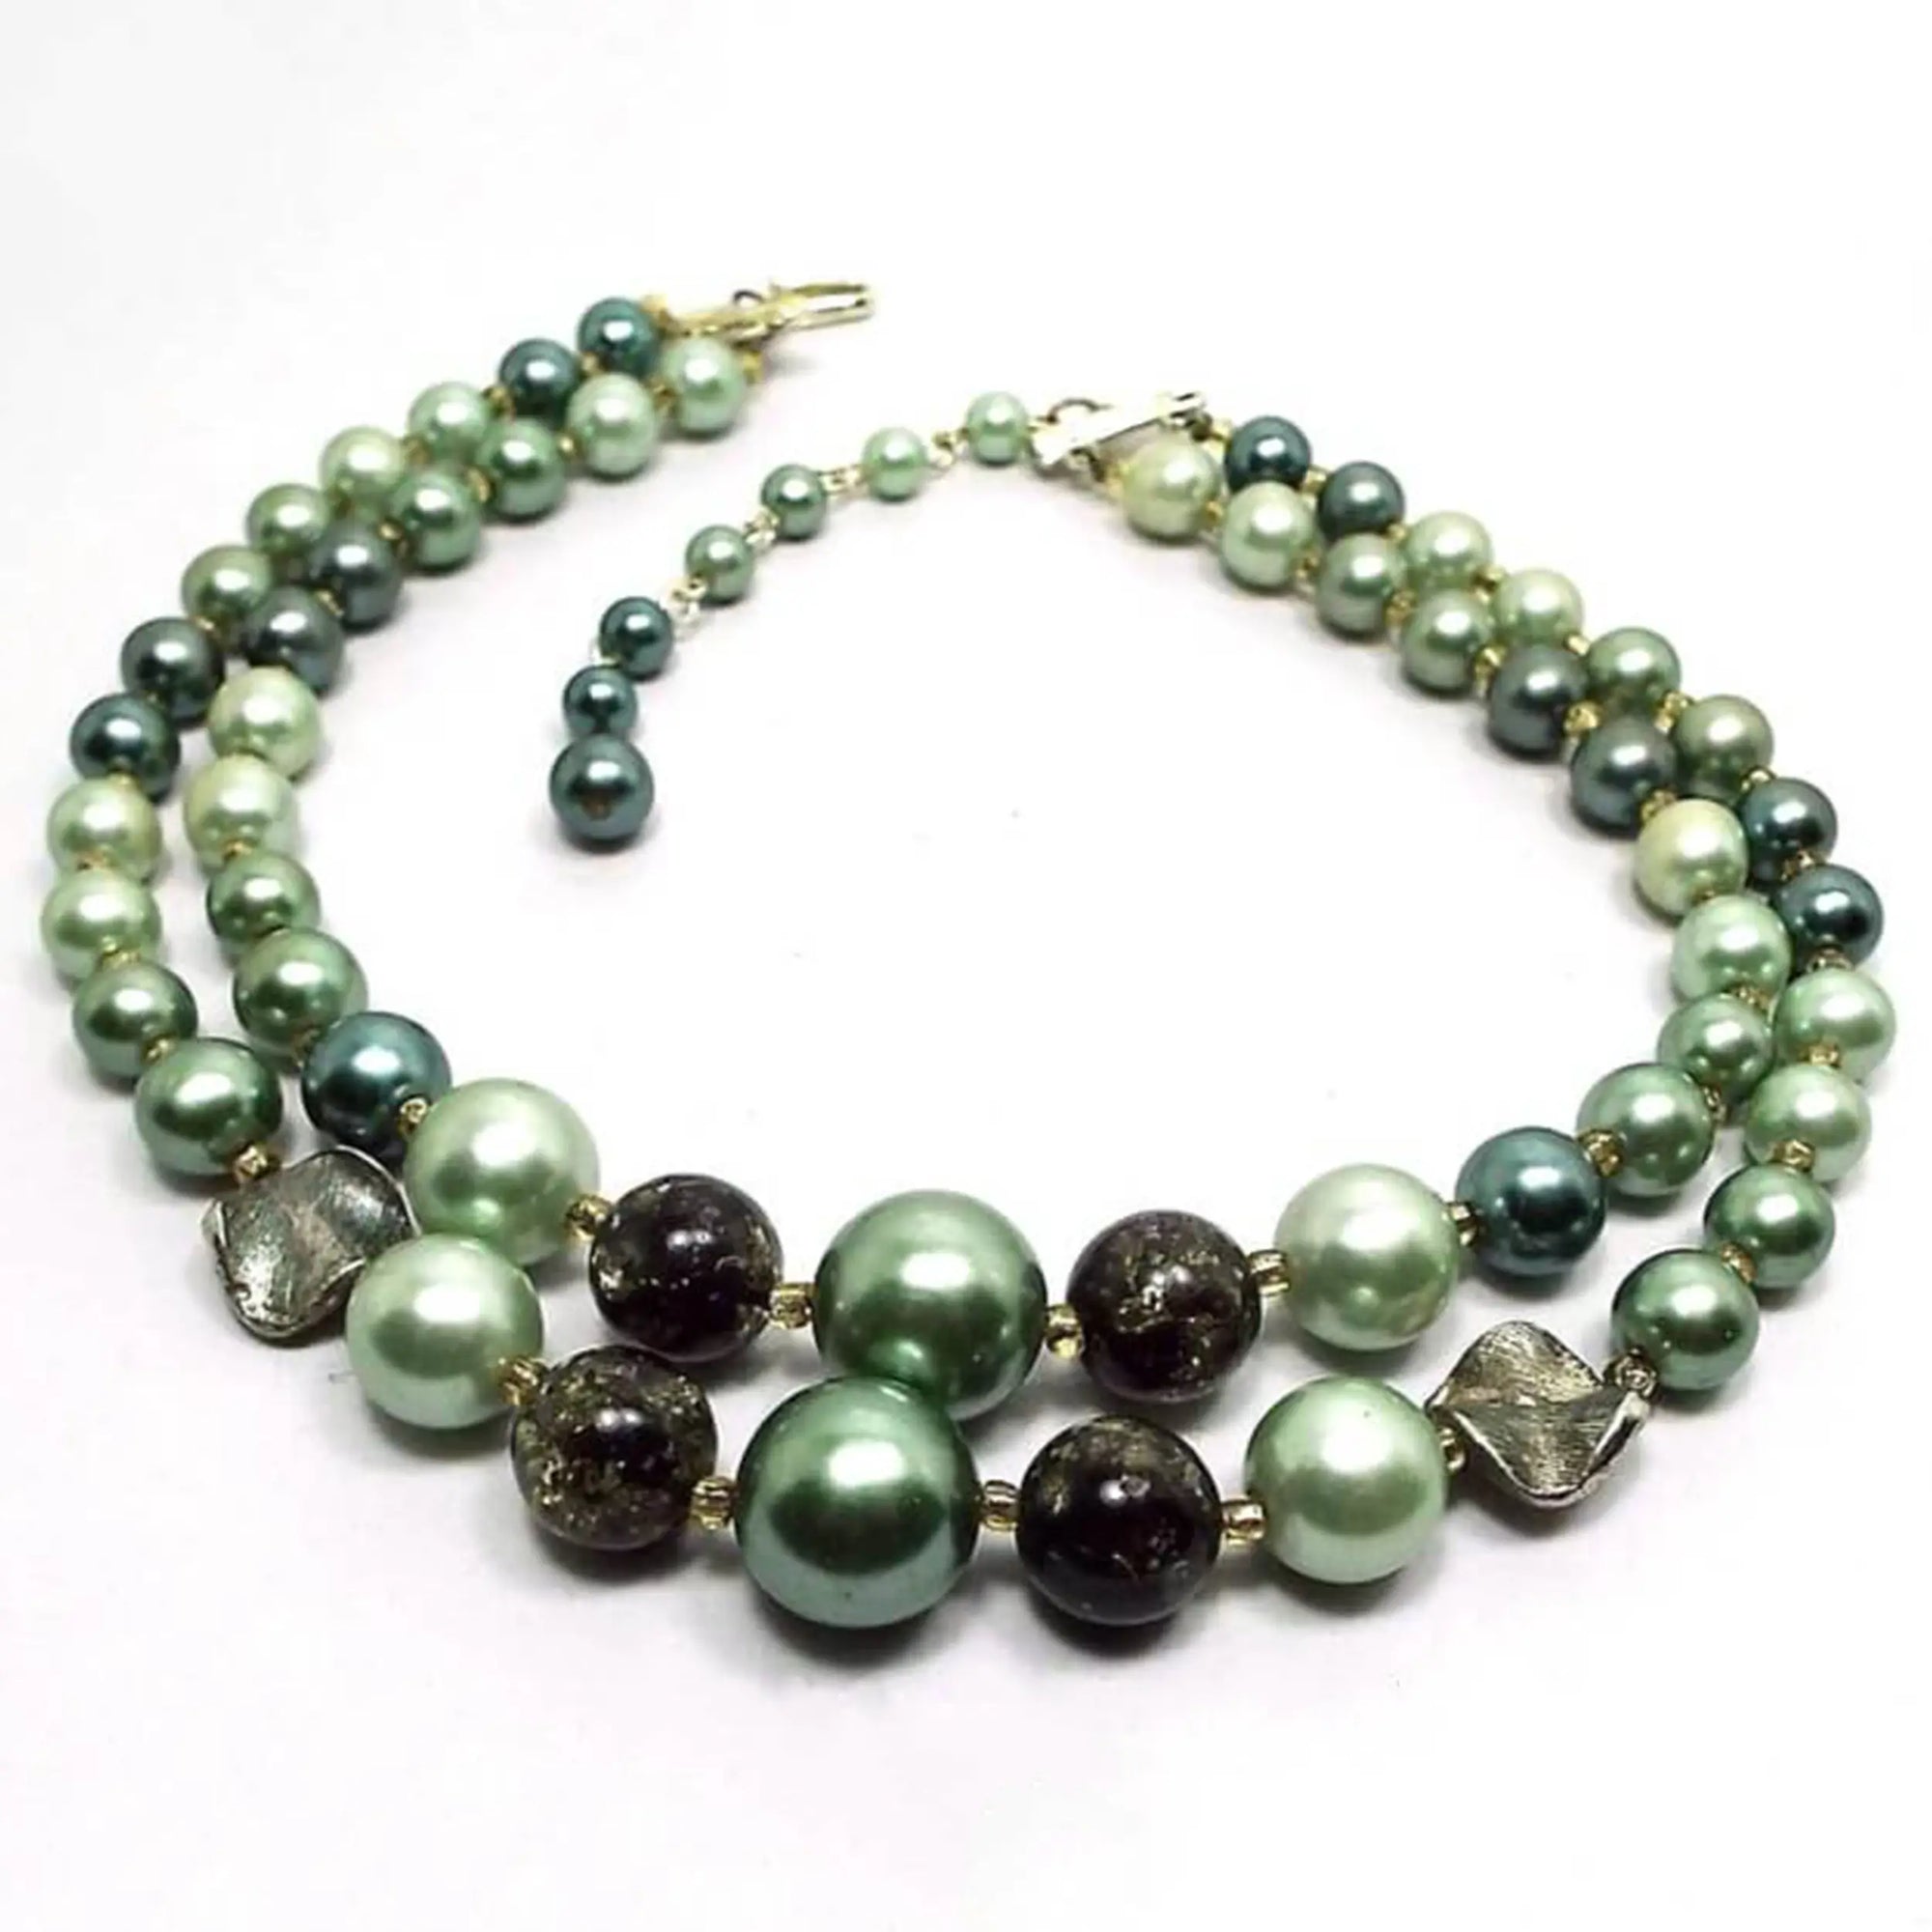 Angled view of the Japan Mid Century vintage multi strand beaded necklace. There are two strands of pearly round and round confetti style beads in varying shades of green. There is a gold tone hook clasp at the end..